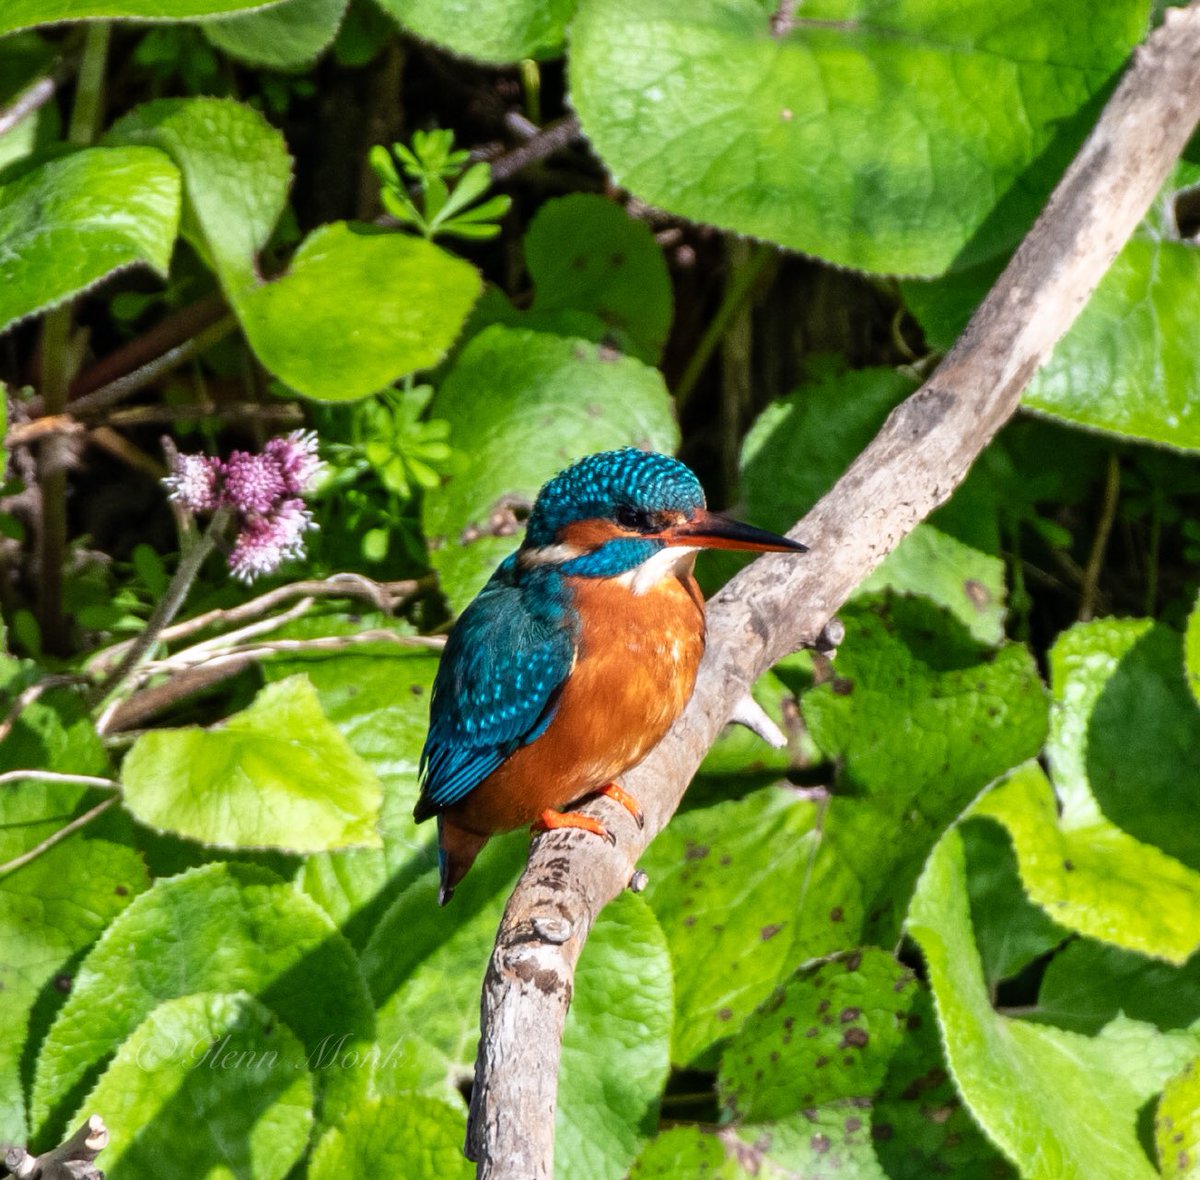 Having spent the last few months trying to catch this little one locally I gave up and went to the dodder. #Kingfisher #riverdodder #nature #Wildlife #Irishwildlife #birdwatching @BirdWatchIE #dodder #femalekingfisher #irishwildbirds